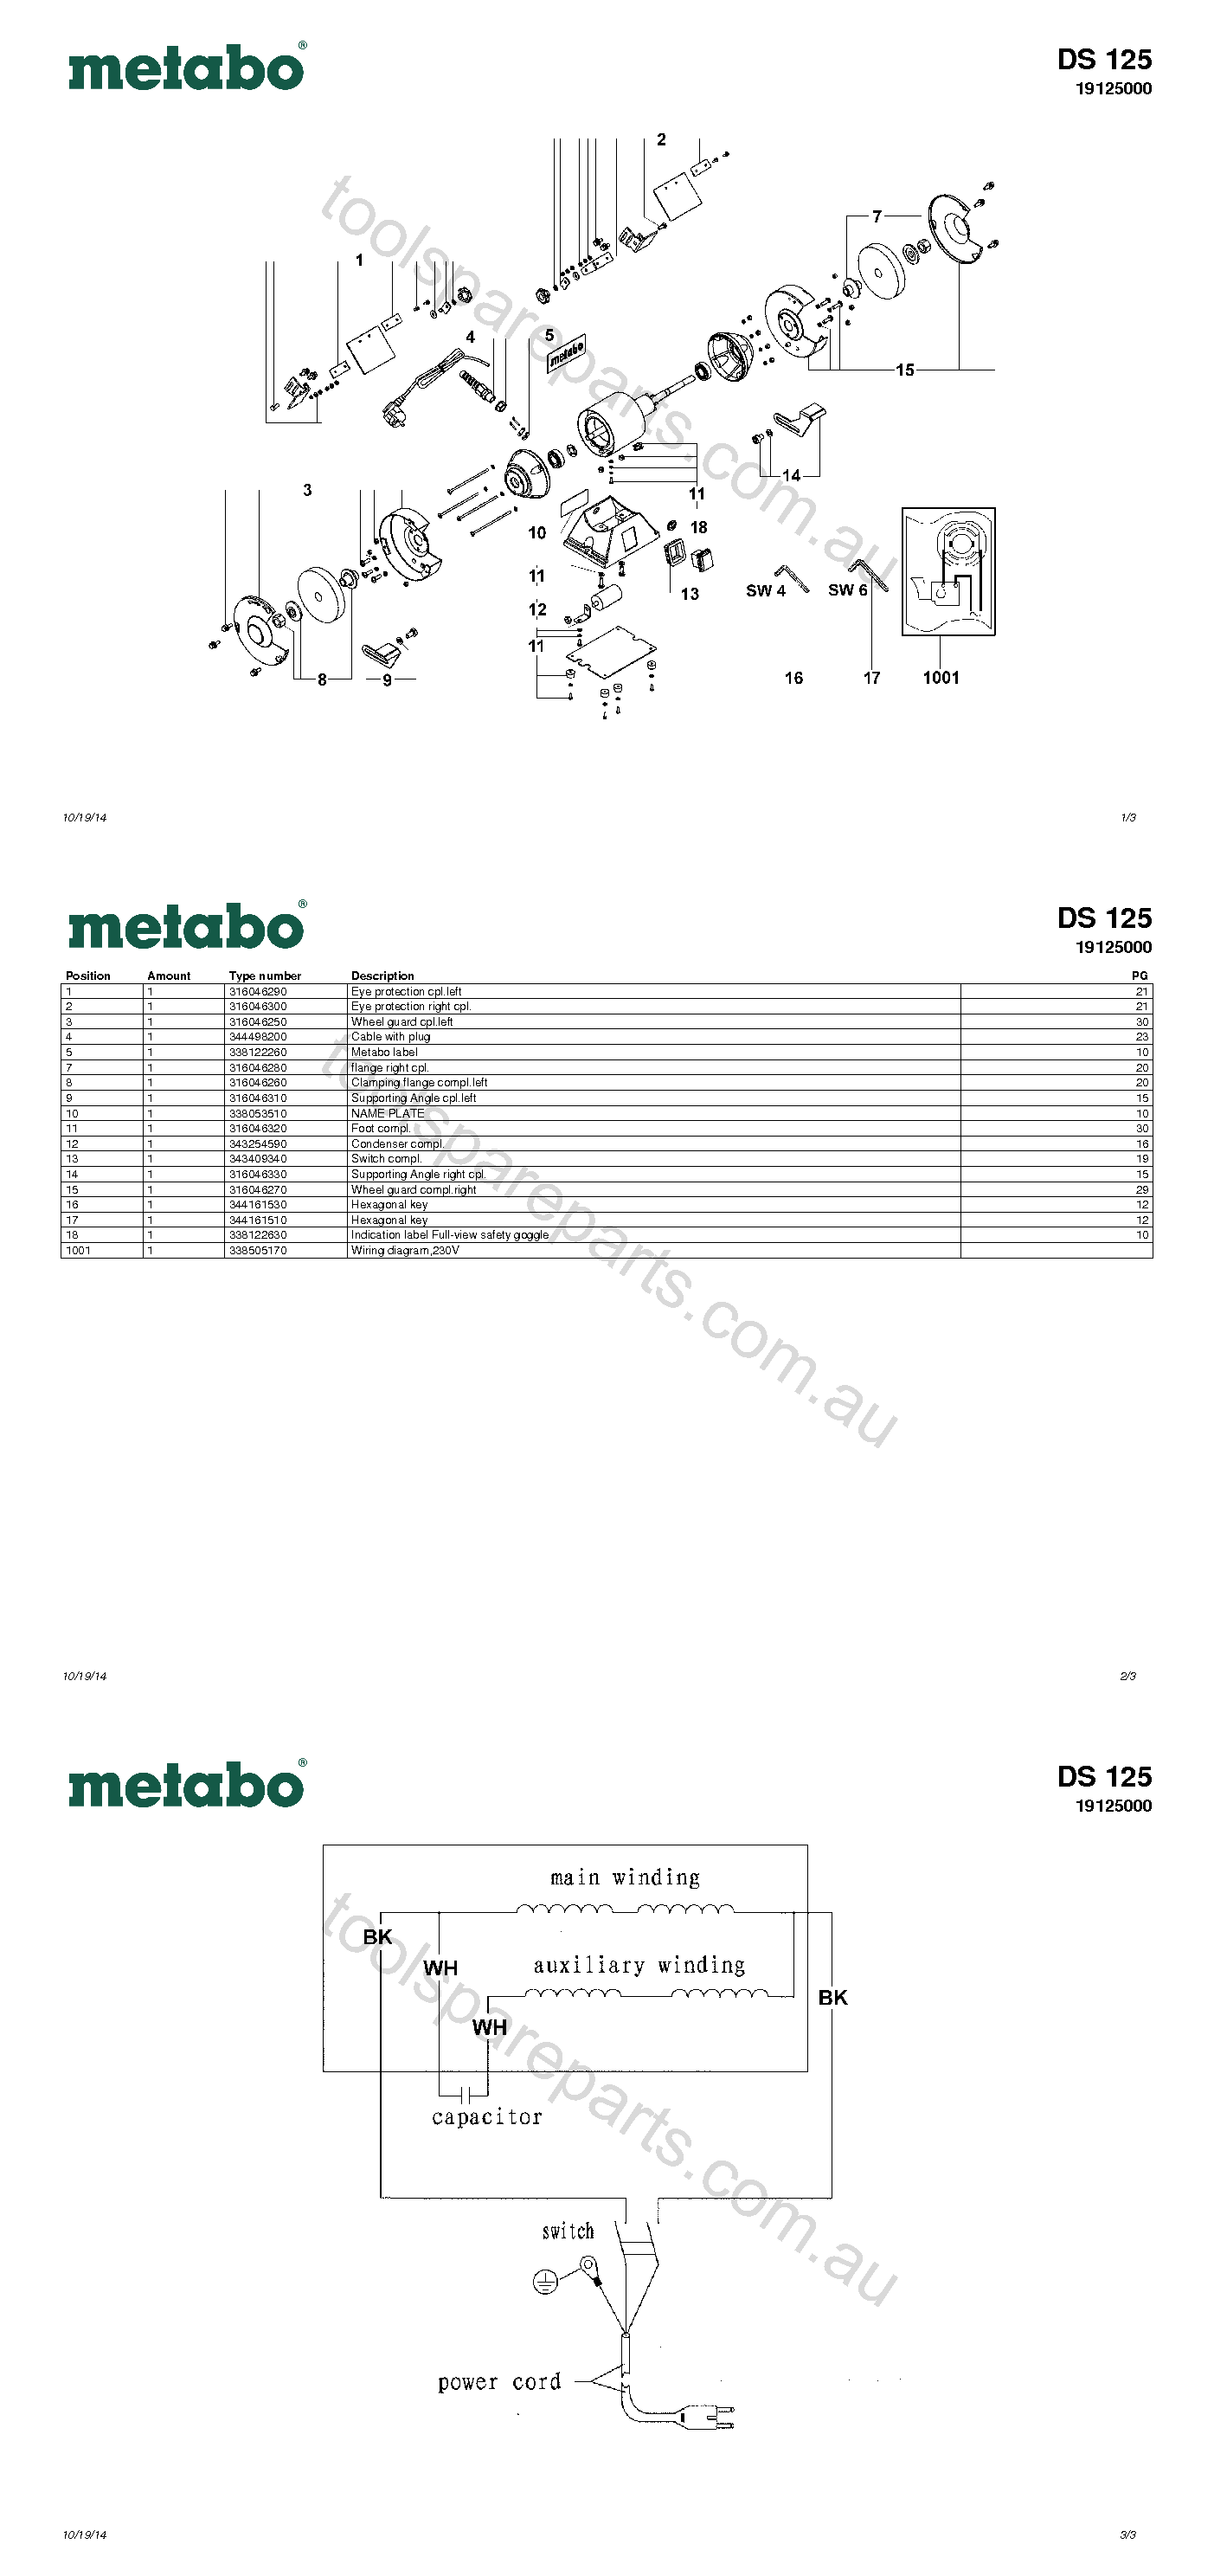 Metabo DS 125 19125000  Diagram 1